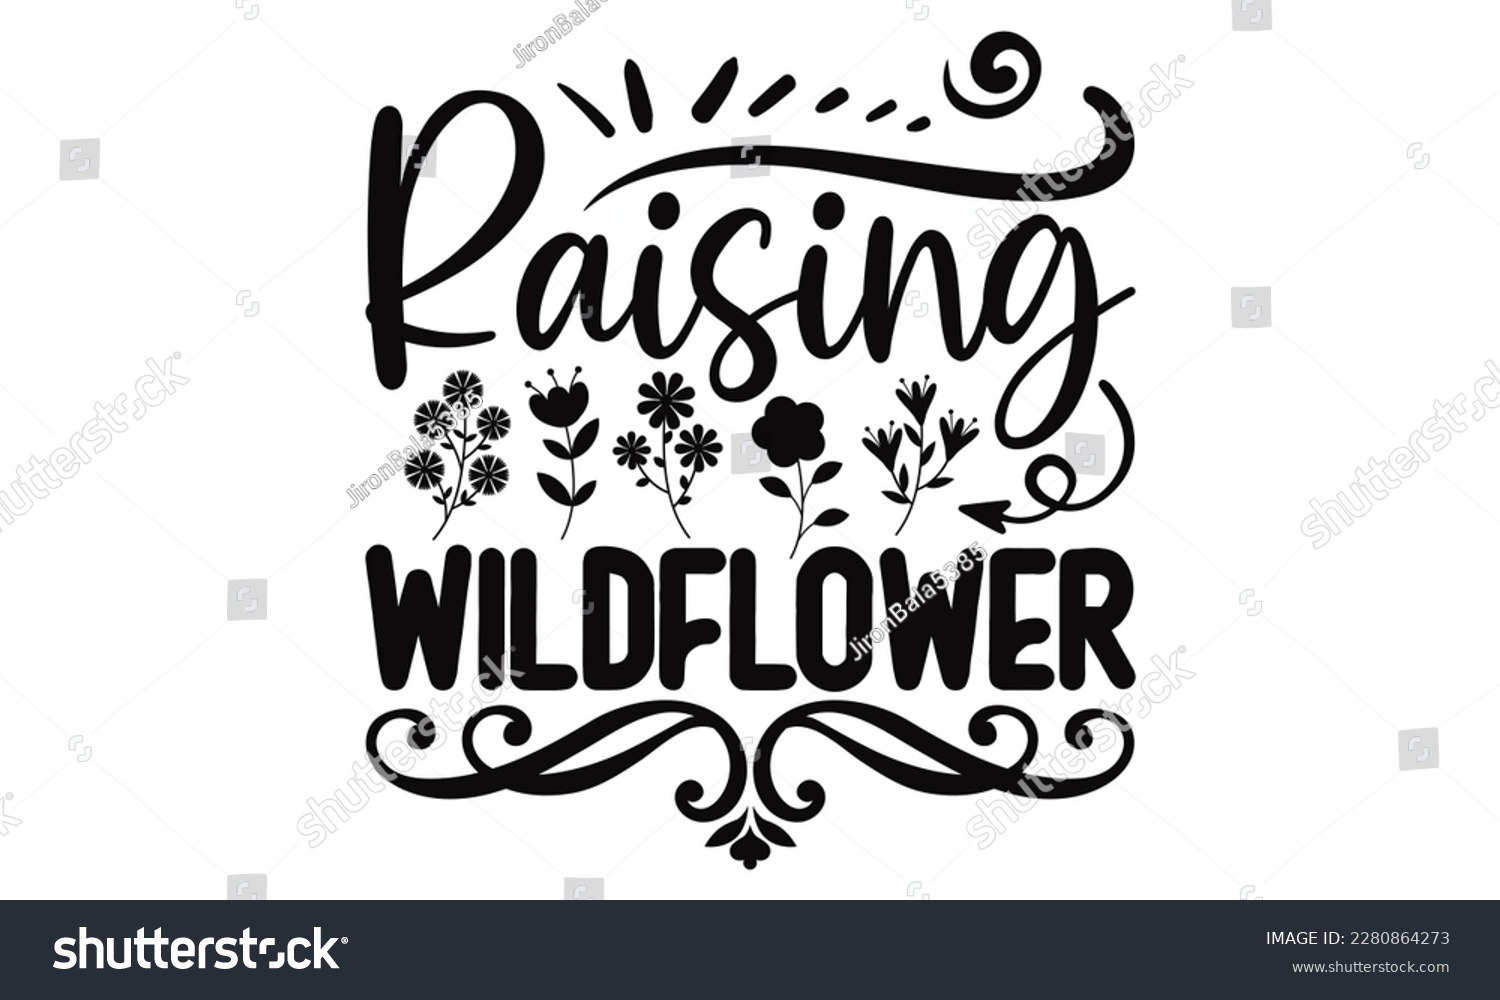 SVG of Raising Wildflower - Mother's Day SVG Design, typography t shirt design, Illustration for prints on t-shirts, bags, posters, cards and Mug.   svg